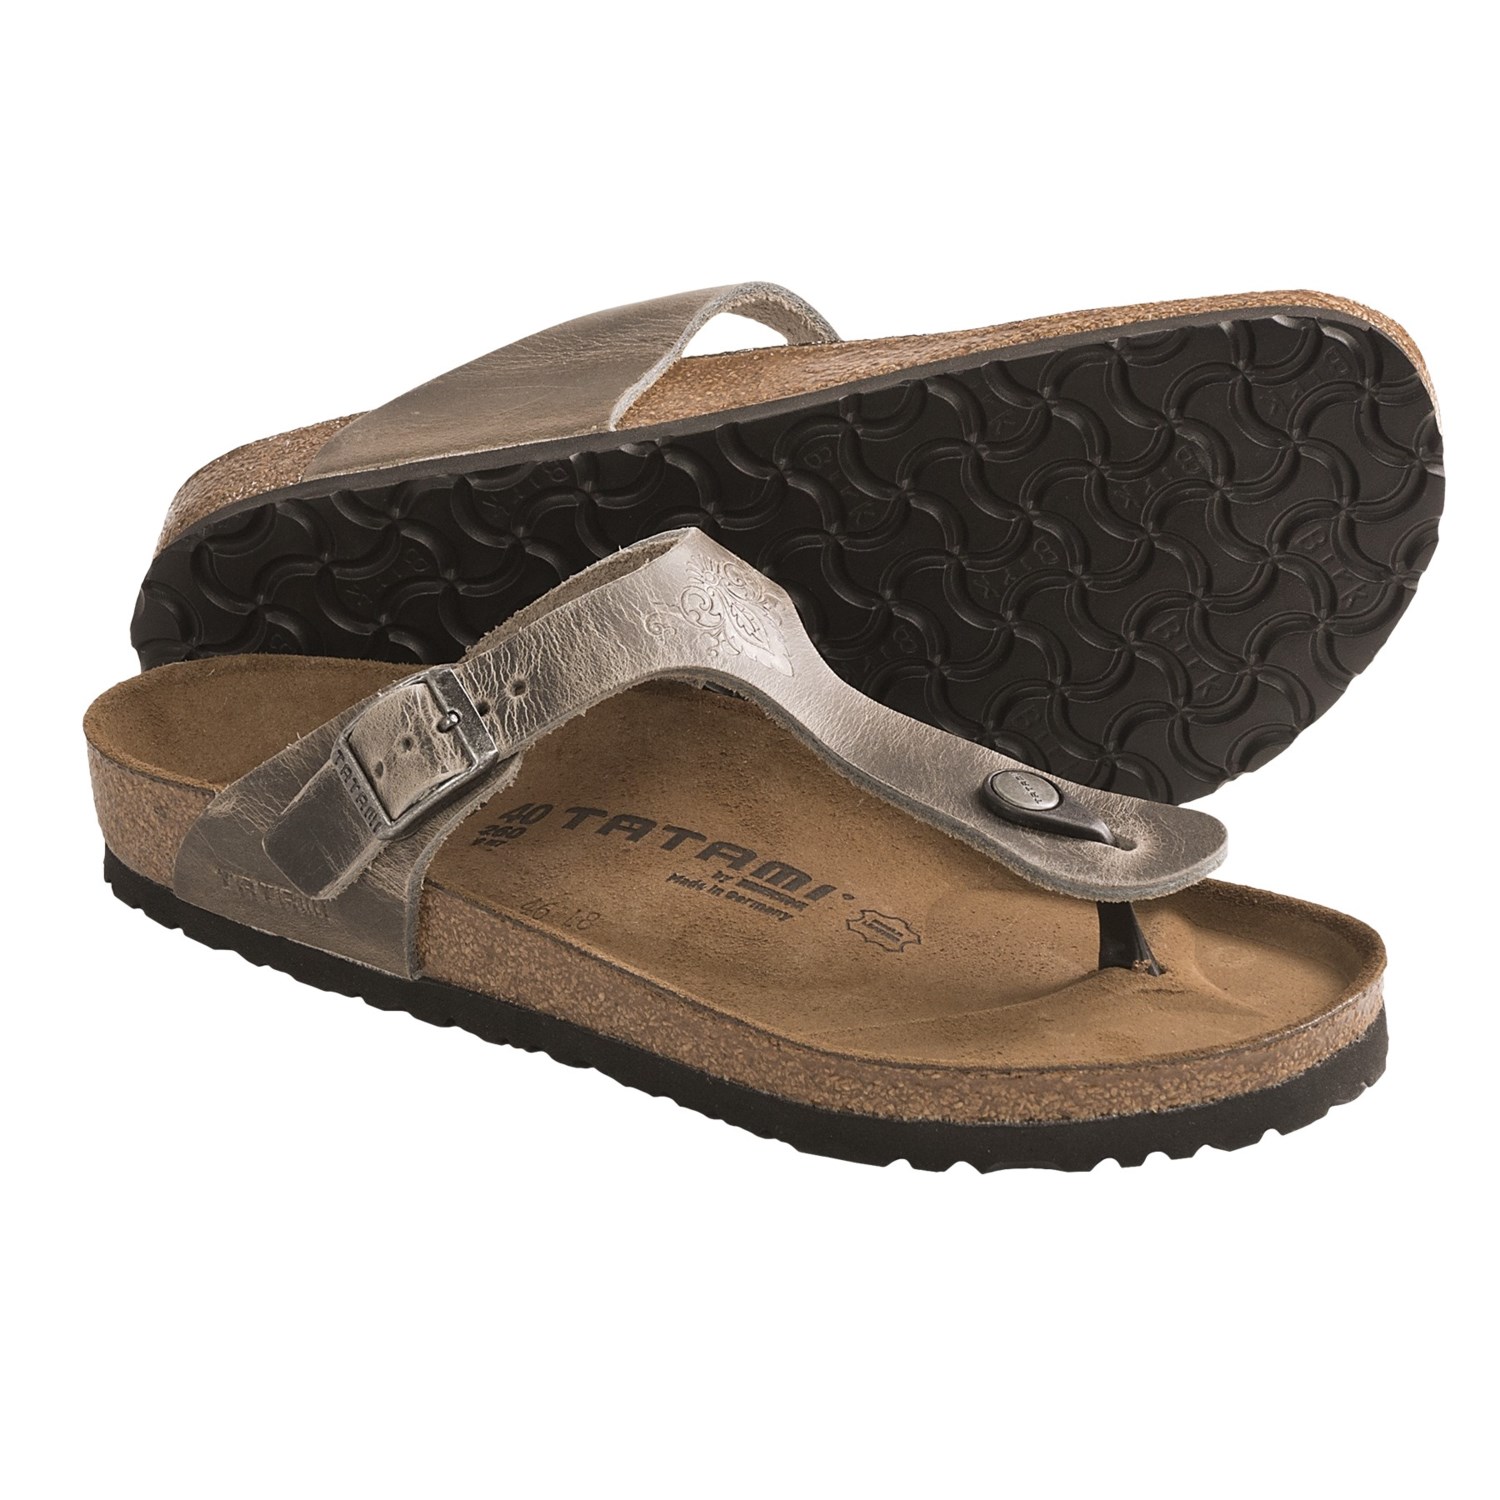 Tatami by Birkenstock Gizeh Impression Sandals - Leather (For Women ...